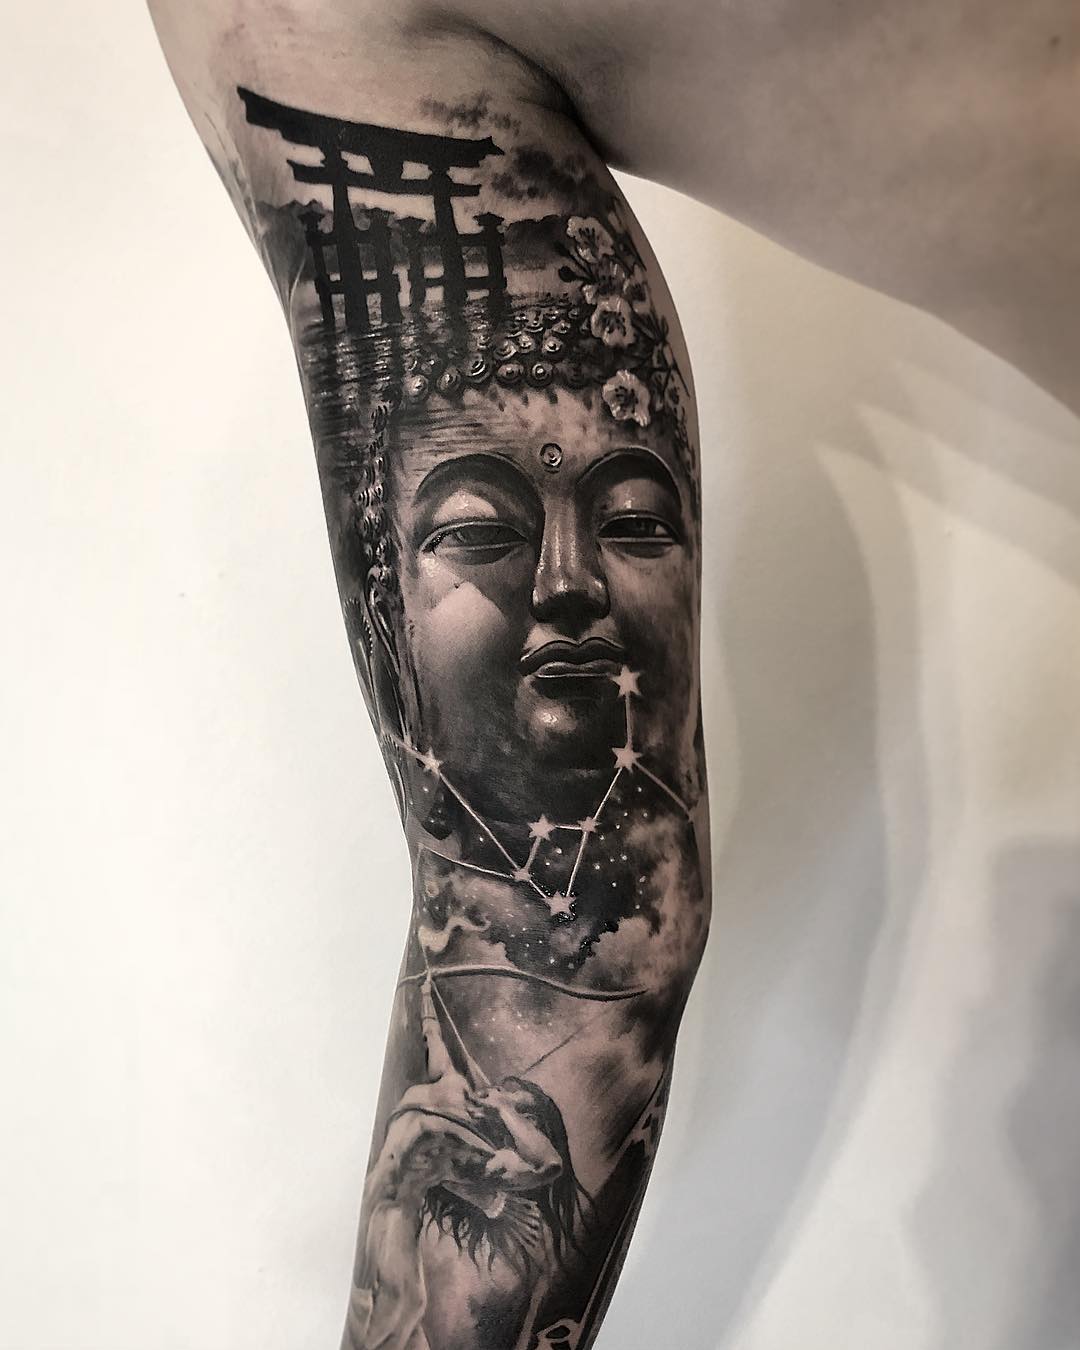 Mohawk Tattoo Studio - Fresh and Healed photos of the Buddha tattoo Flo  done a week ago. We love it when our customers take care of their tattoos  and they heal this